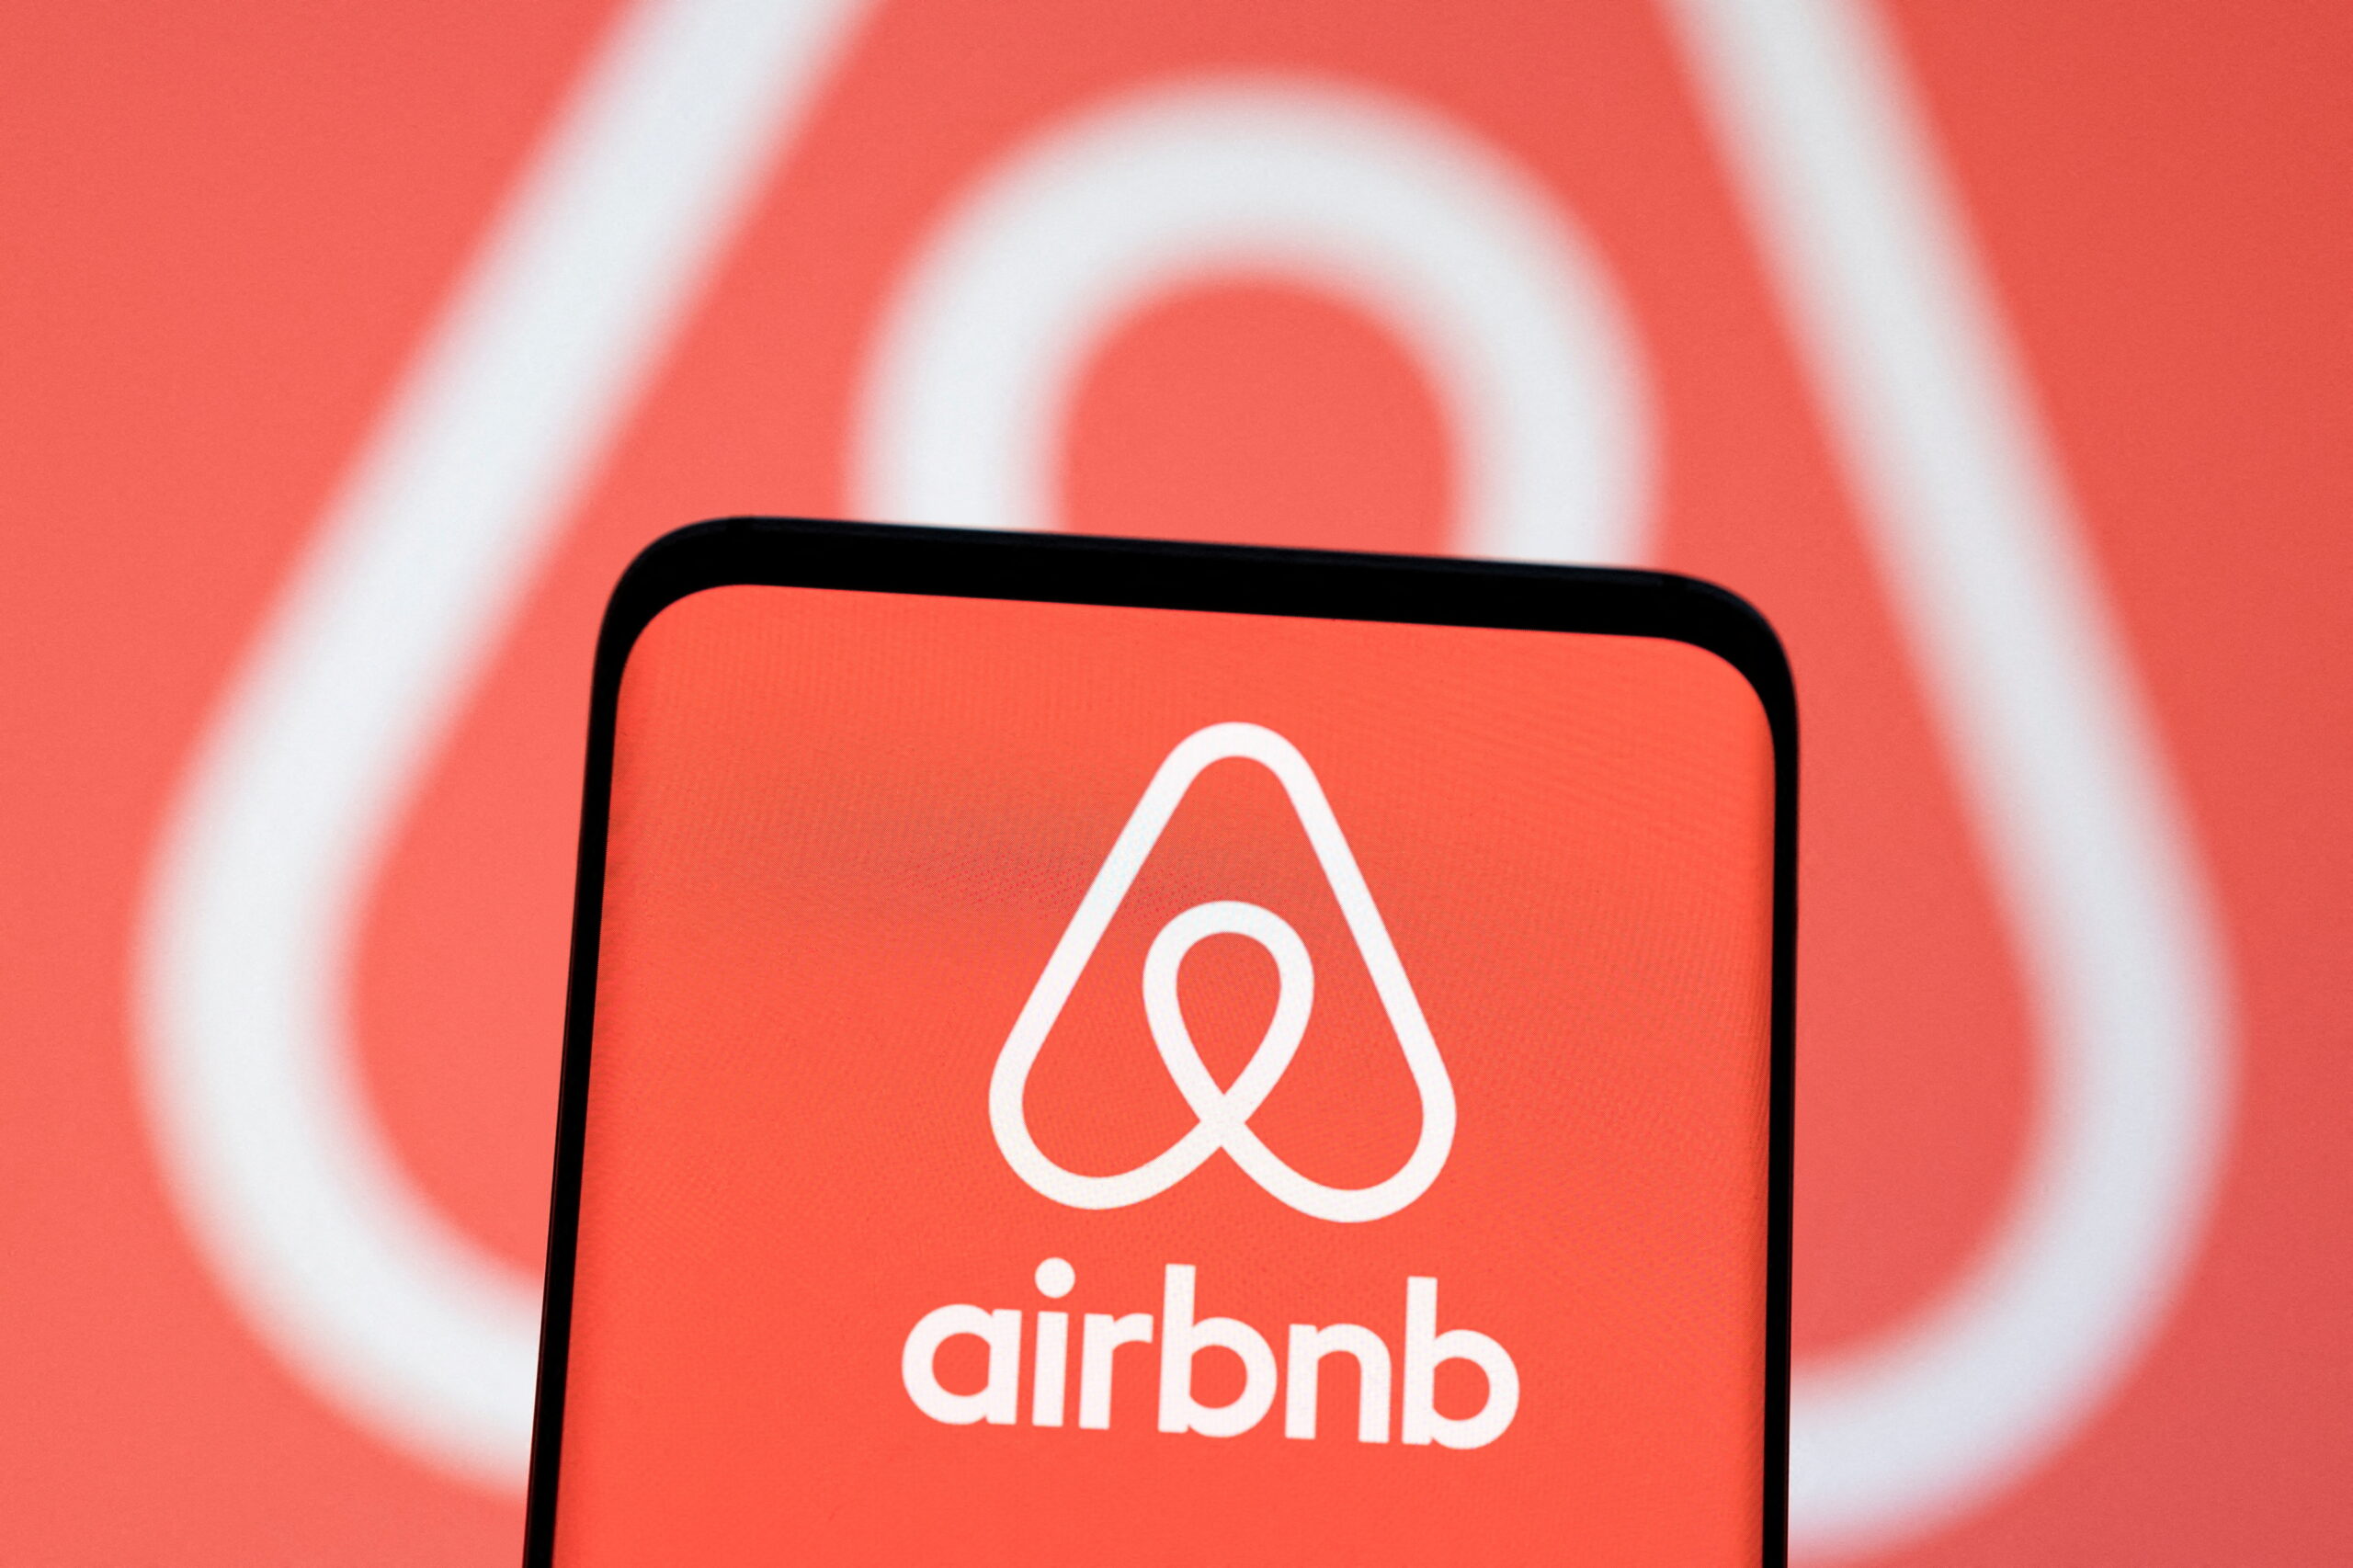 Airbnb Shuts Down Business in China, Withdrawing 150,000 Listings